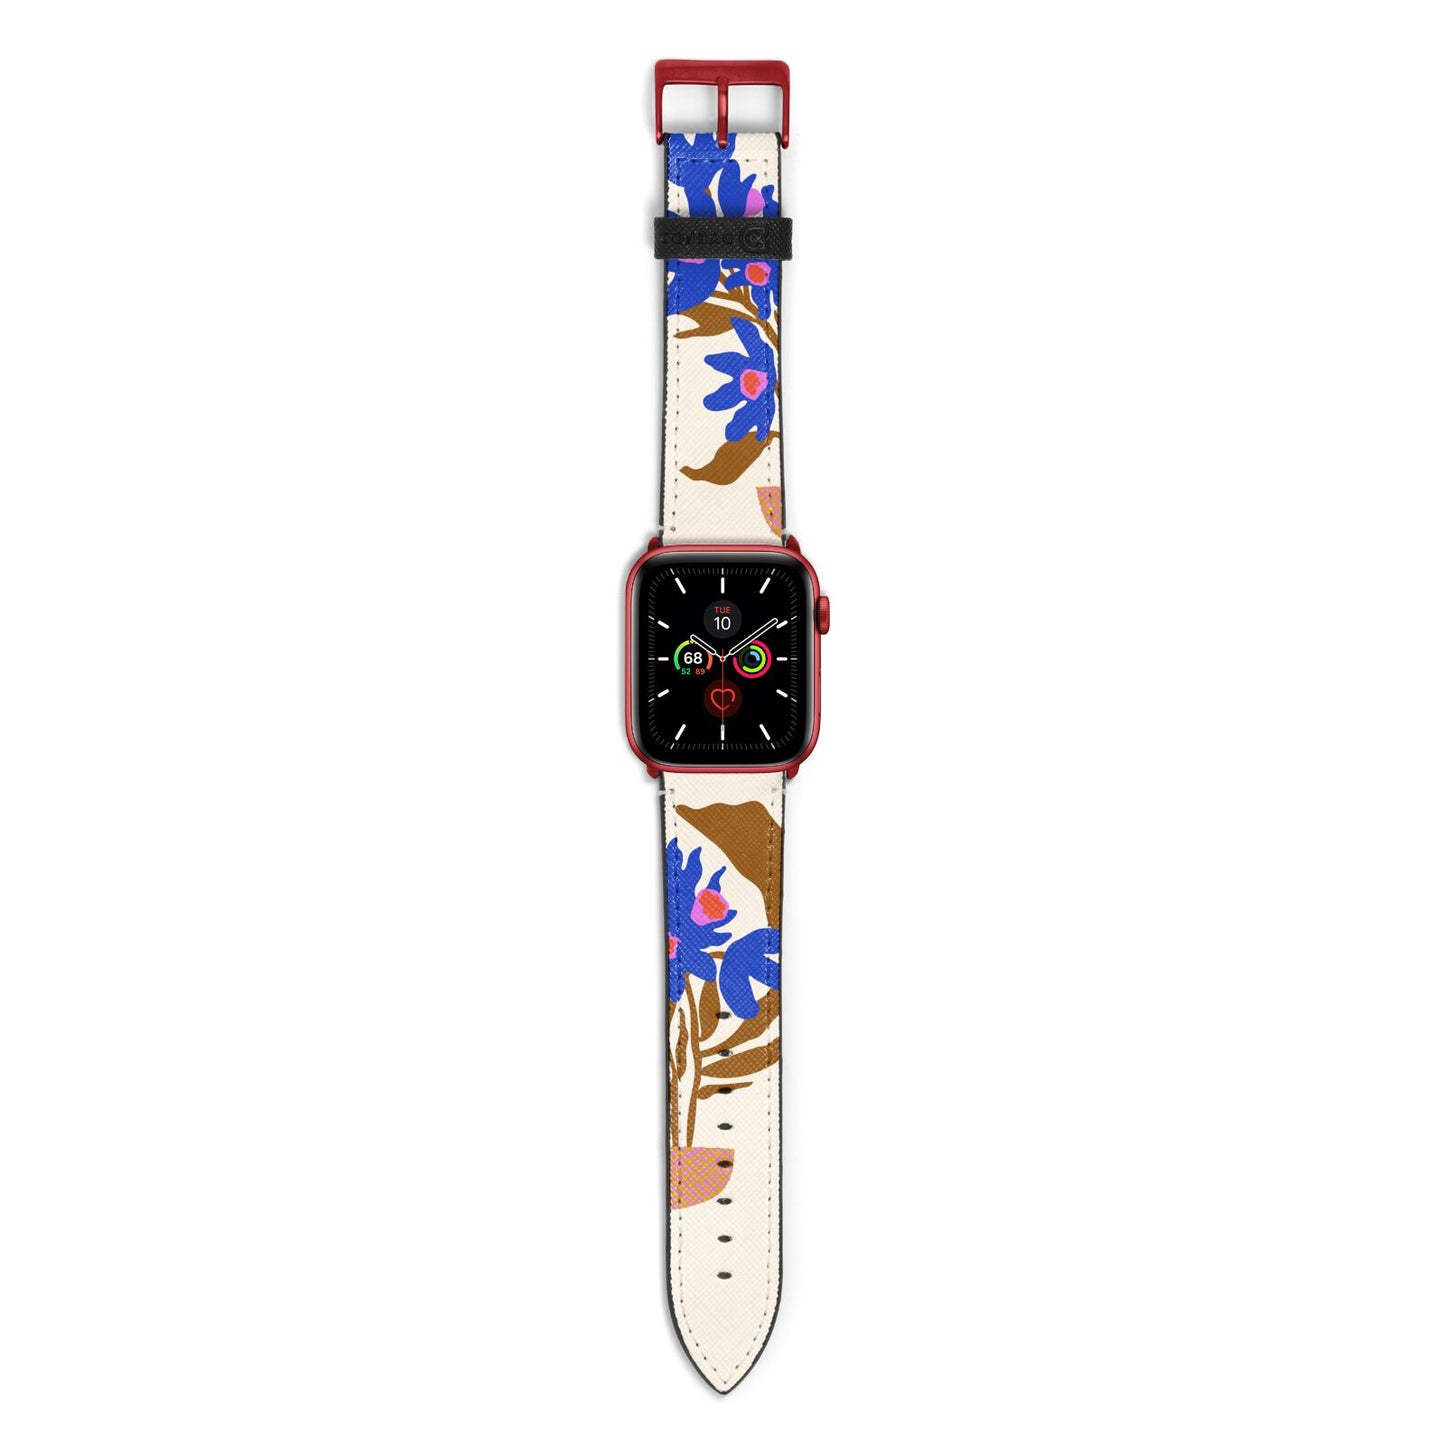 Flowers in a Vase Apple Watch Strap with Red Hardware